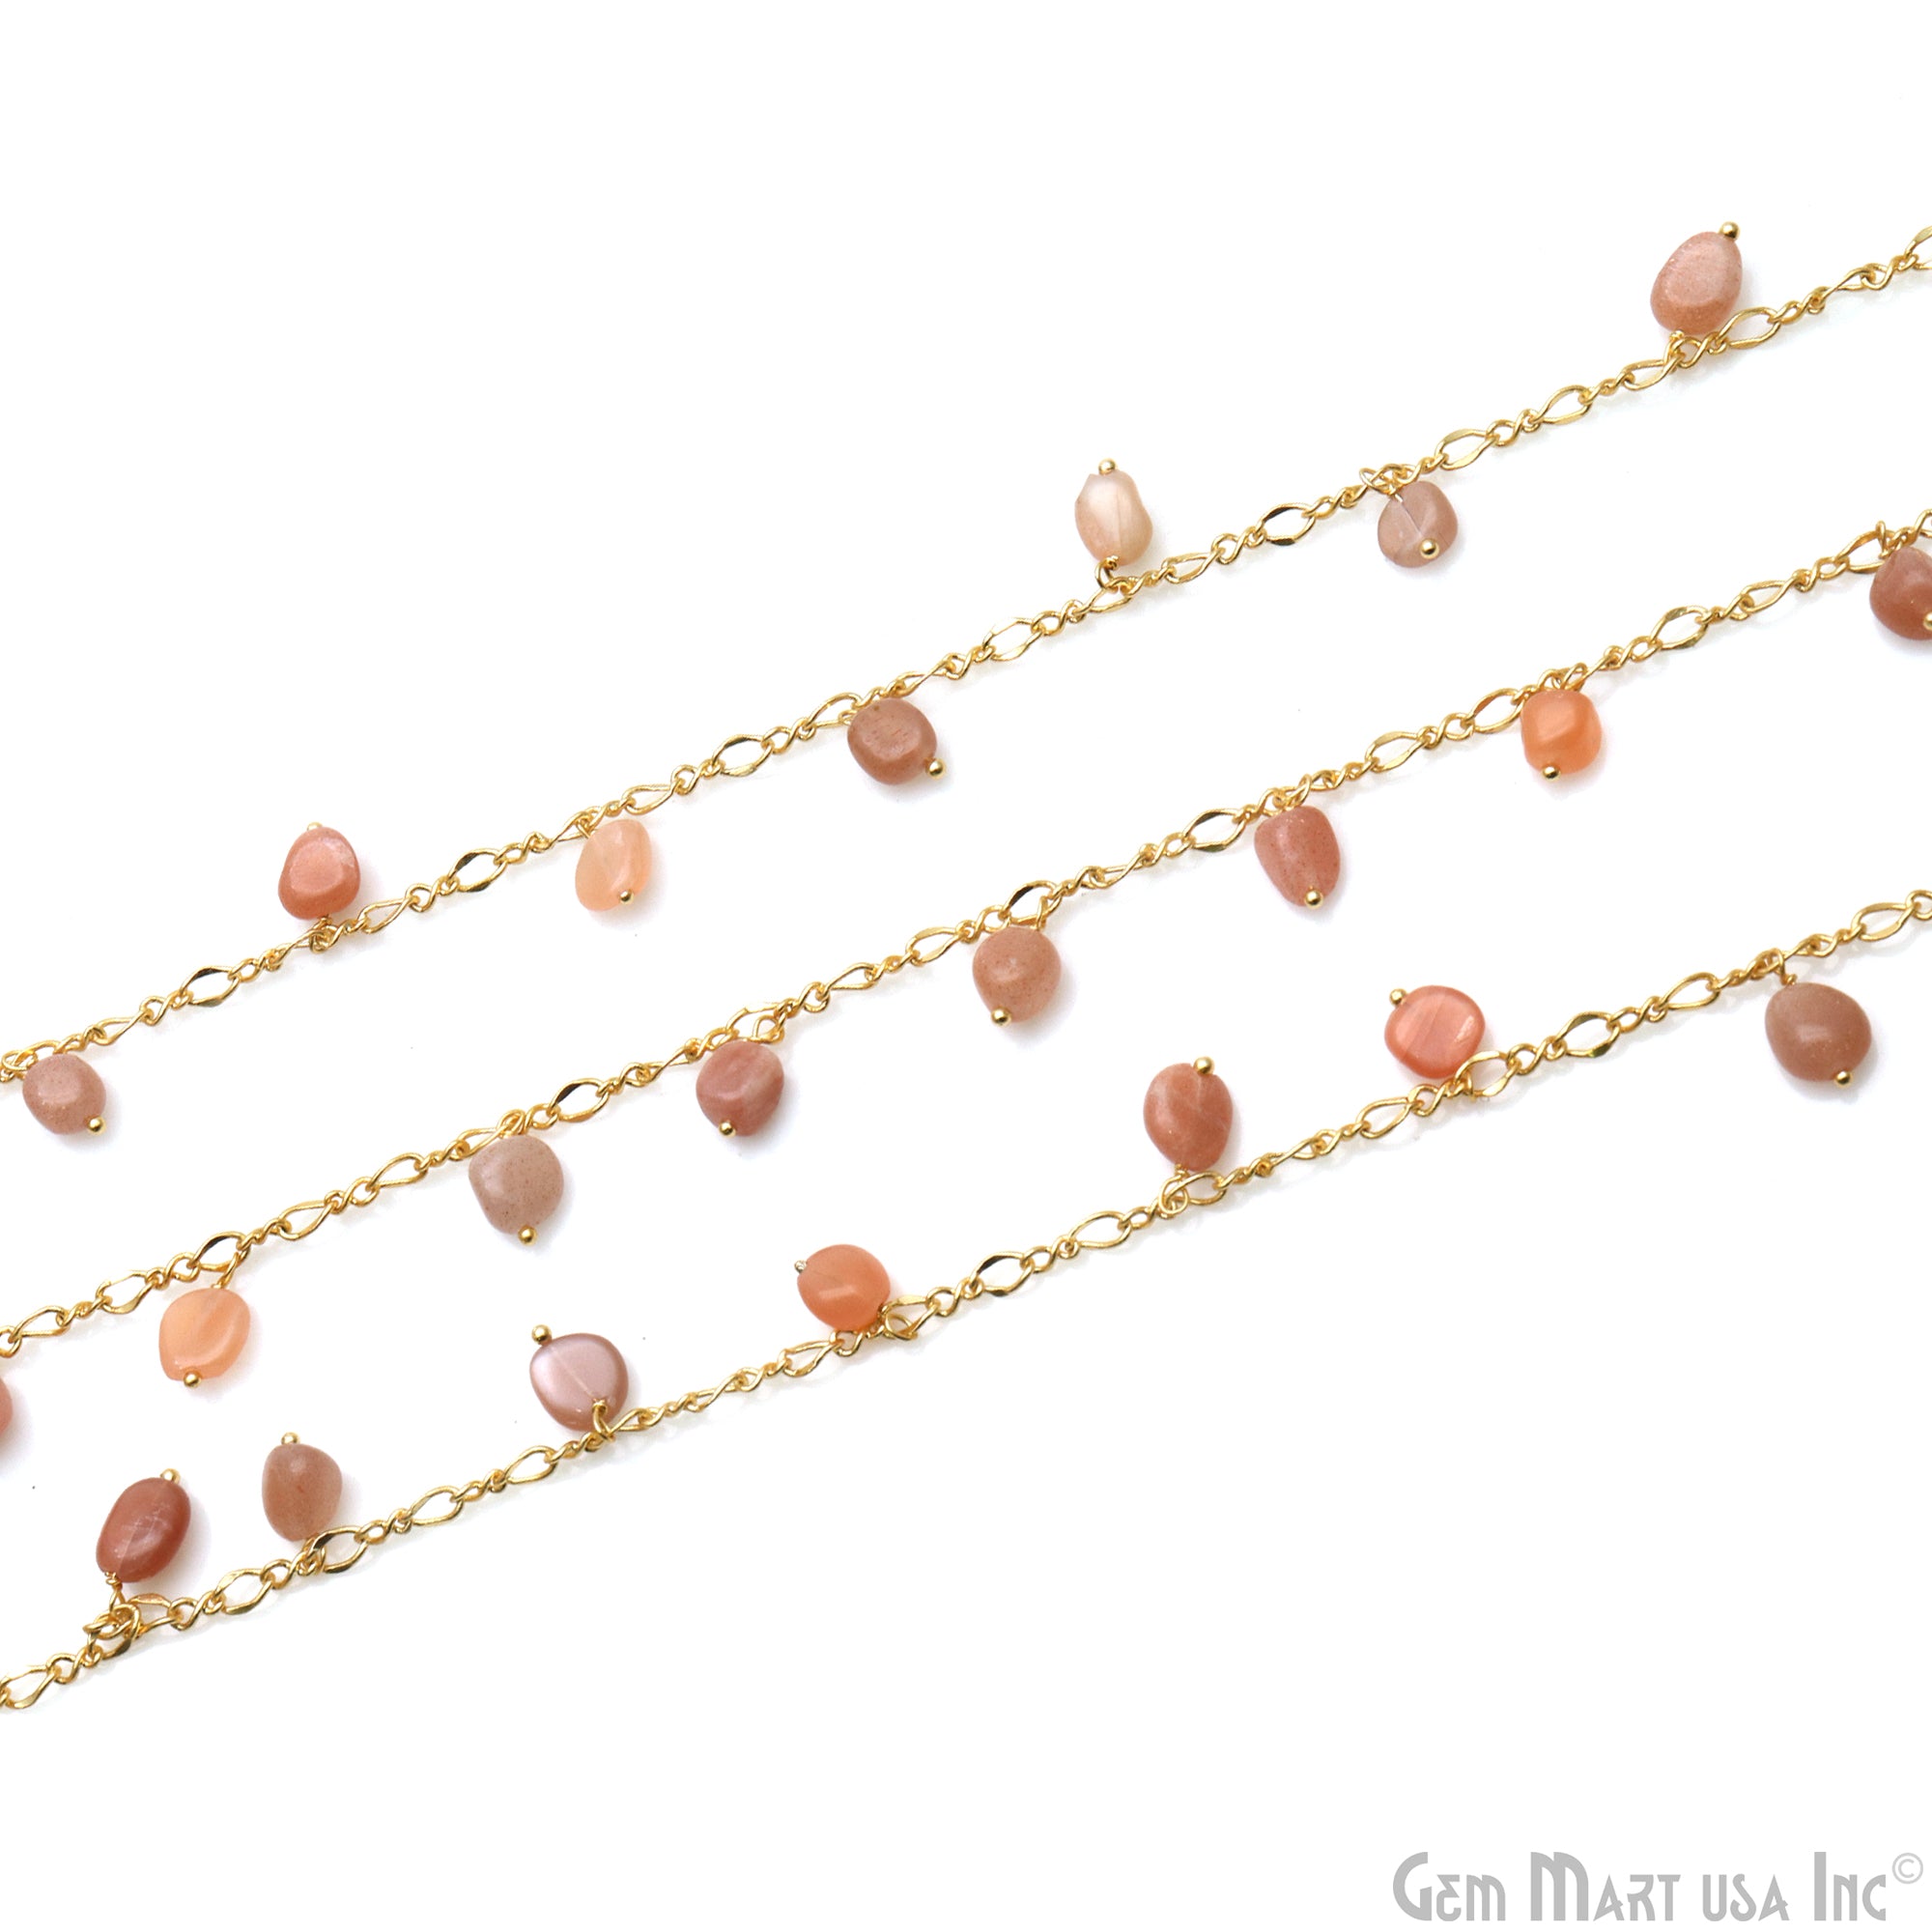 Peach Moonstone Tumble Beads 8x5mm Gold Plated Cluster Dangle Chain